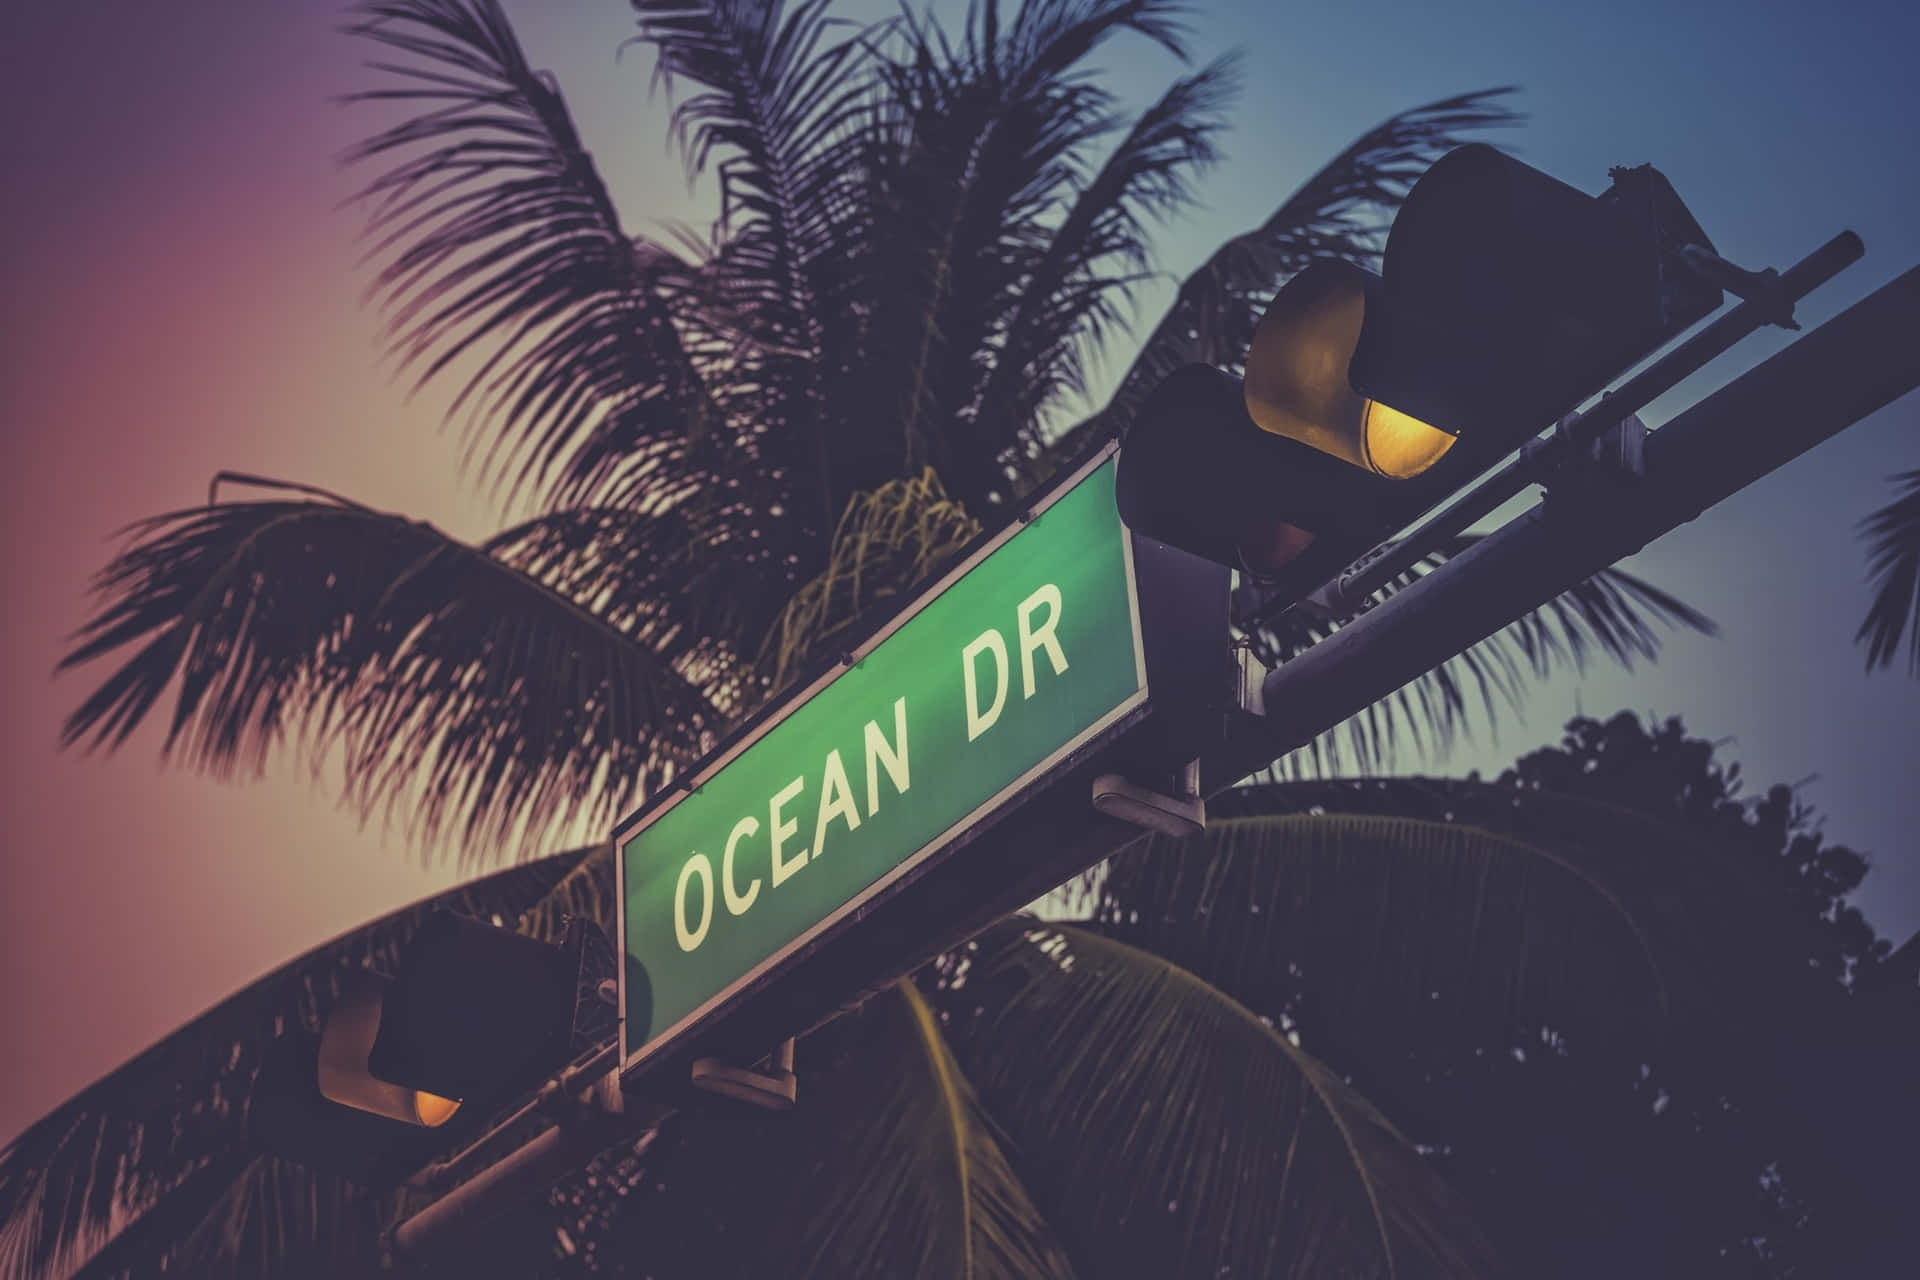 A Street Sign With Ocean Dr